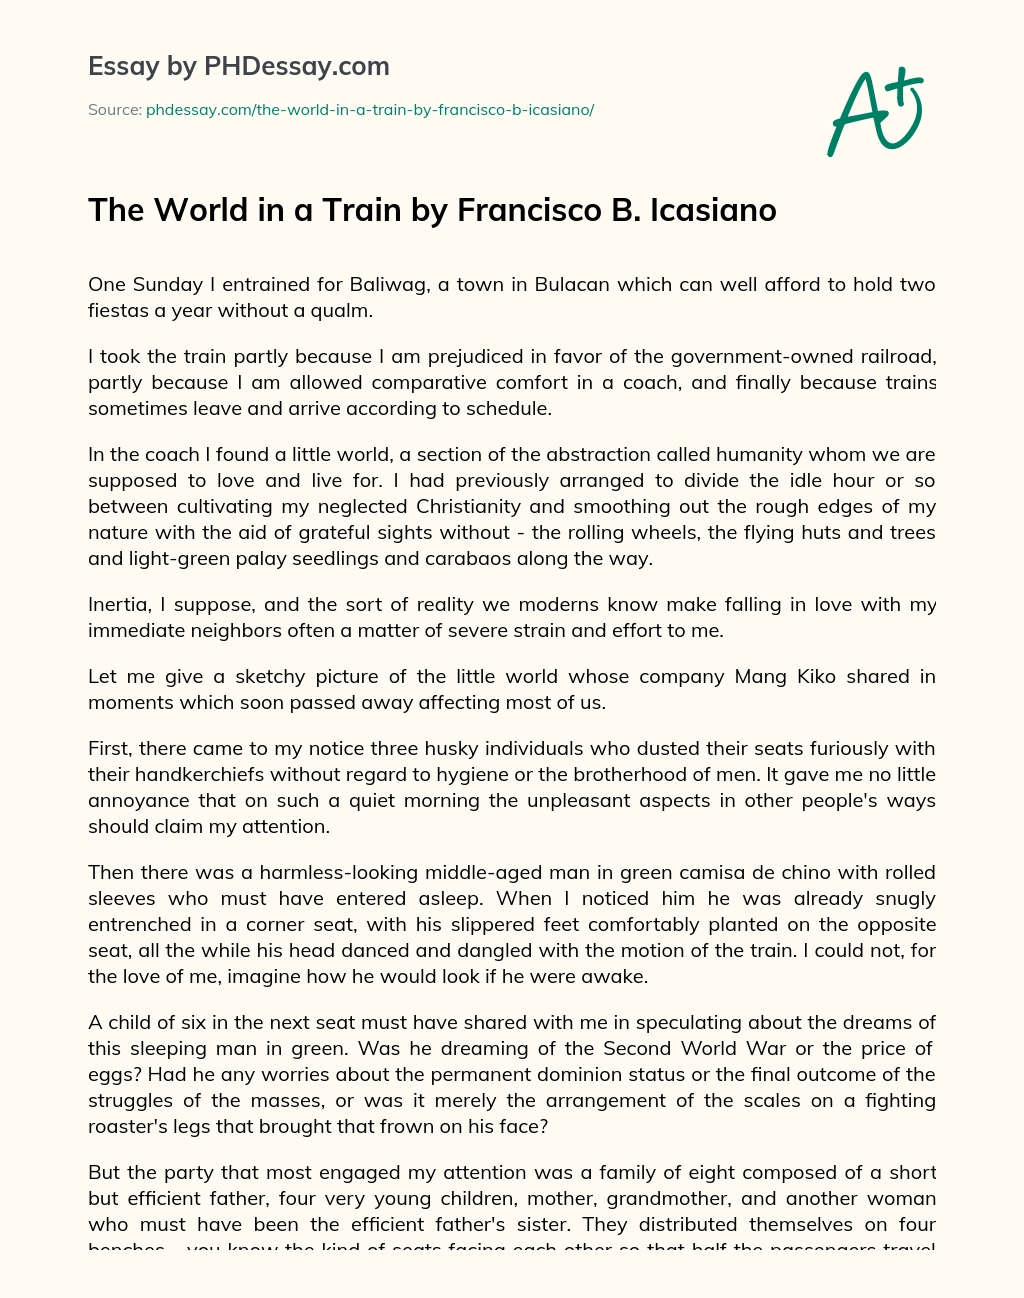 The World in a Train by  Francisco B. Icasiano essay